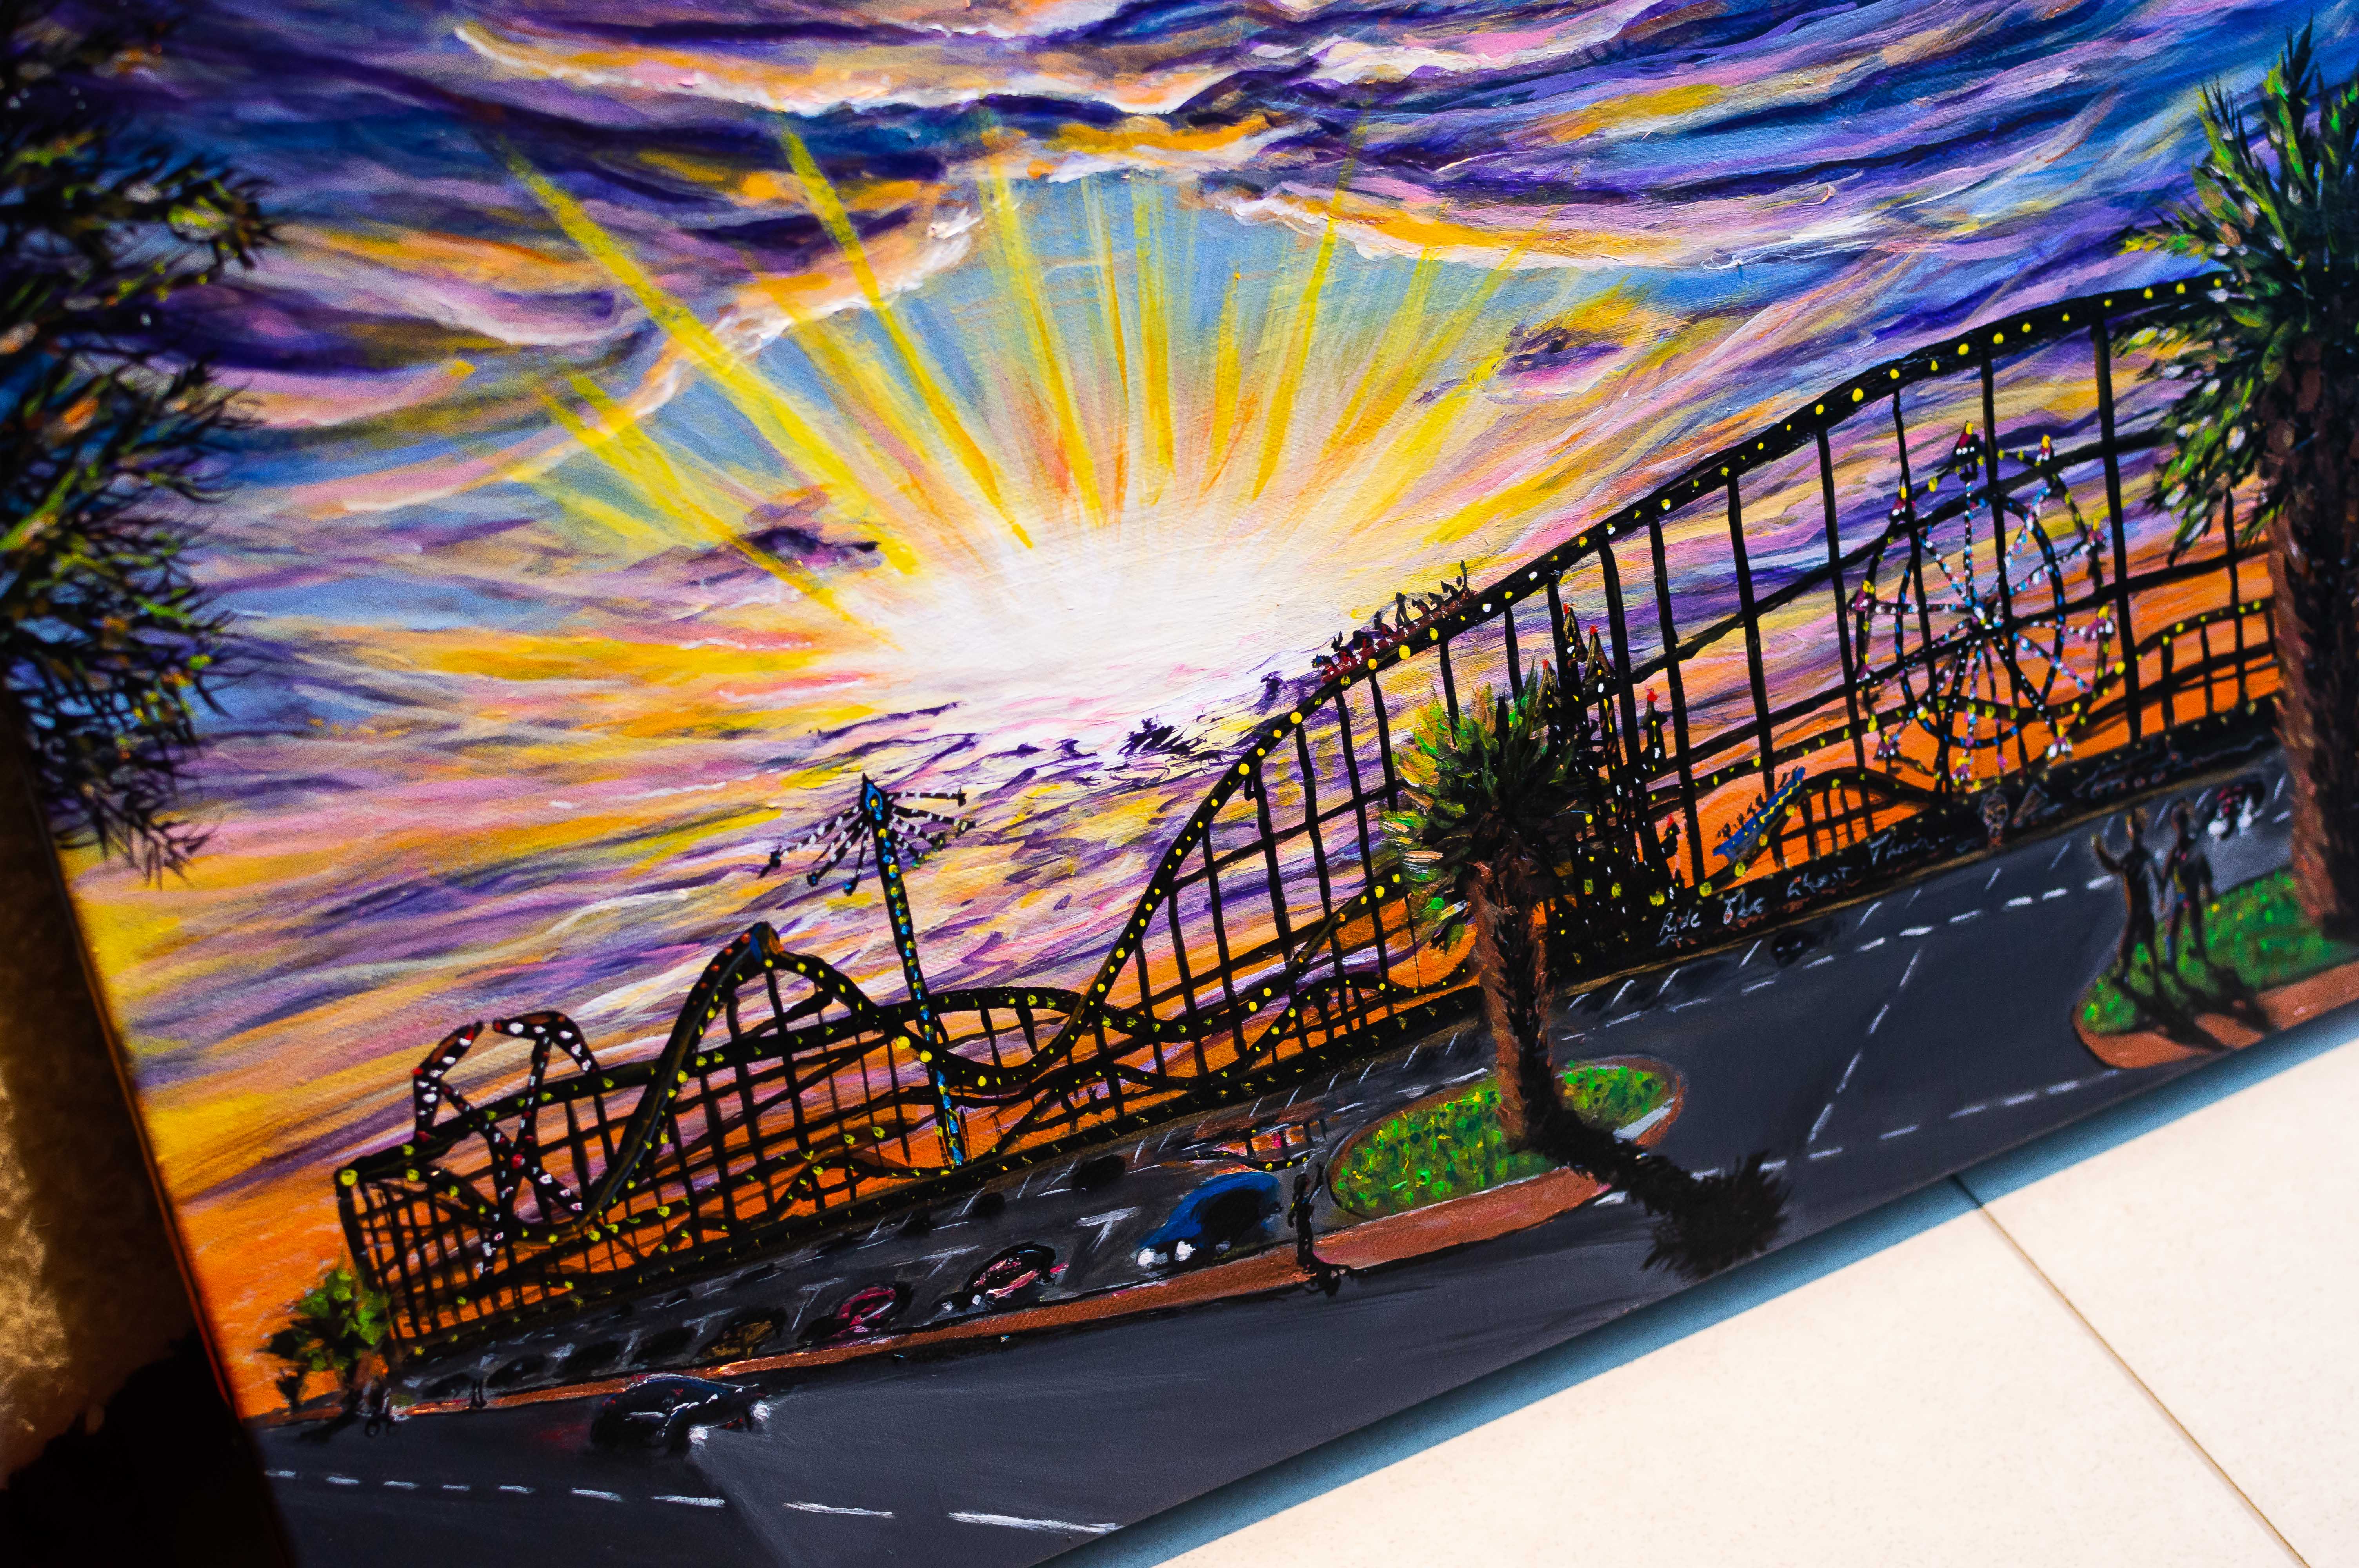 A colourful scene portraying an amusement park at dusk, with blues/yellows/oranges/purples across a starry sky and dramatic clouds. Figures are seen in the foreground watching the rollercoaster, and a car is headed in the direction of the viewer.